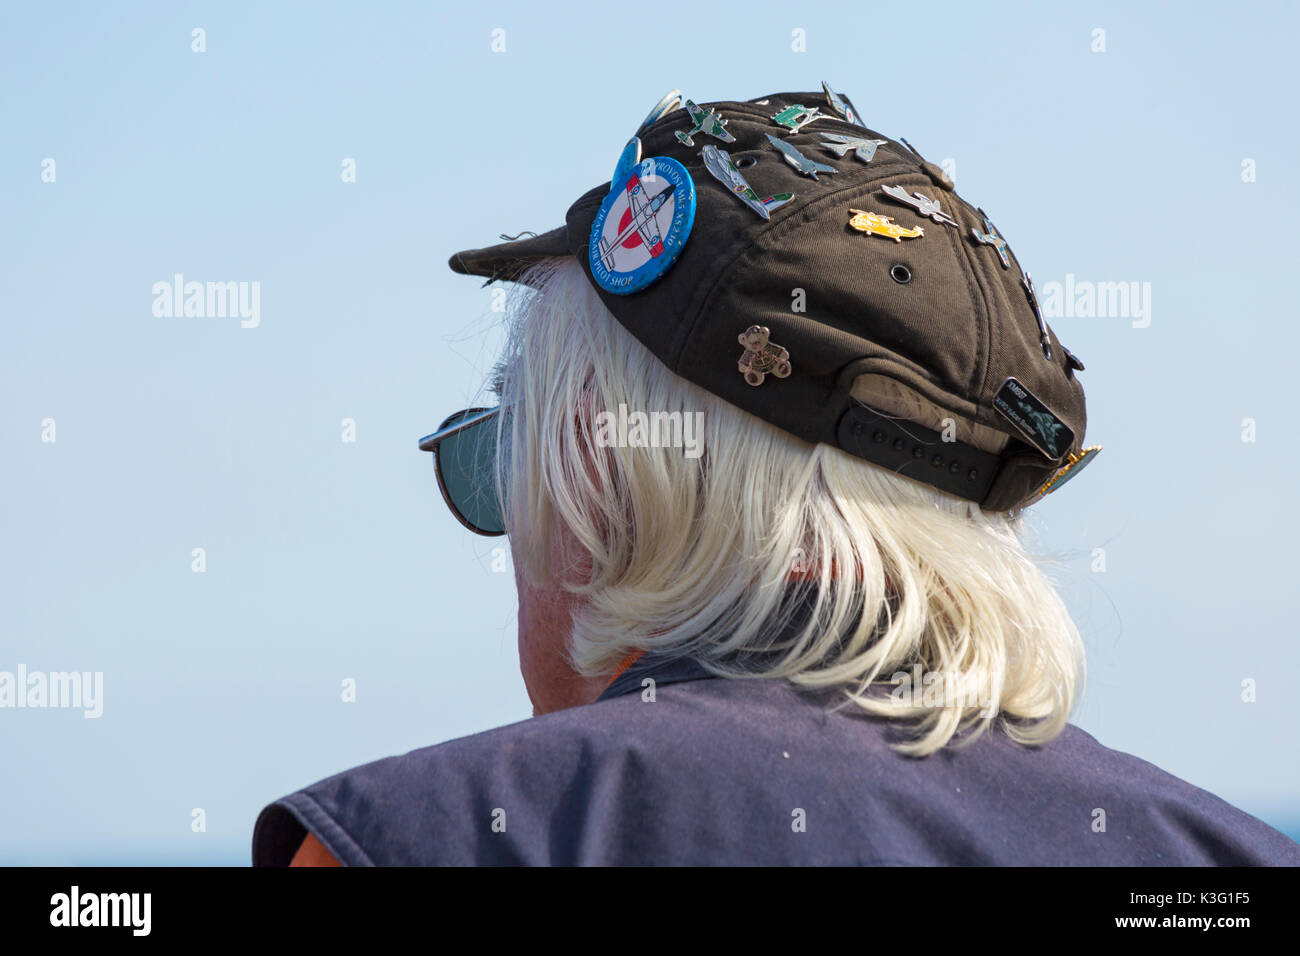 Bournemouth, UK. 2nd Sep, 2017. The third day of the tenth anniversary of the Bournemouth Air Festival with over 500,000 expected today with warm sunny weather. Plane enthusiast! Enamel badges of various planes and aircrafts on hat. Credit: Carolyn Jenkins/Alamy Live News Stock Photo